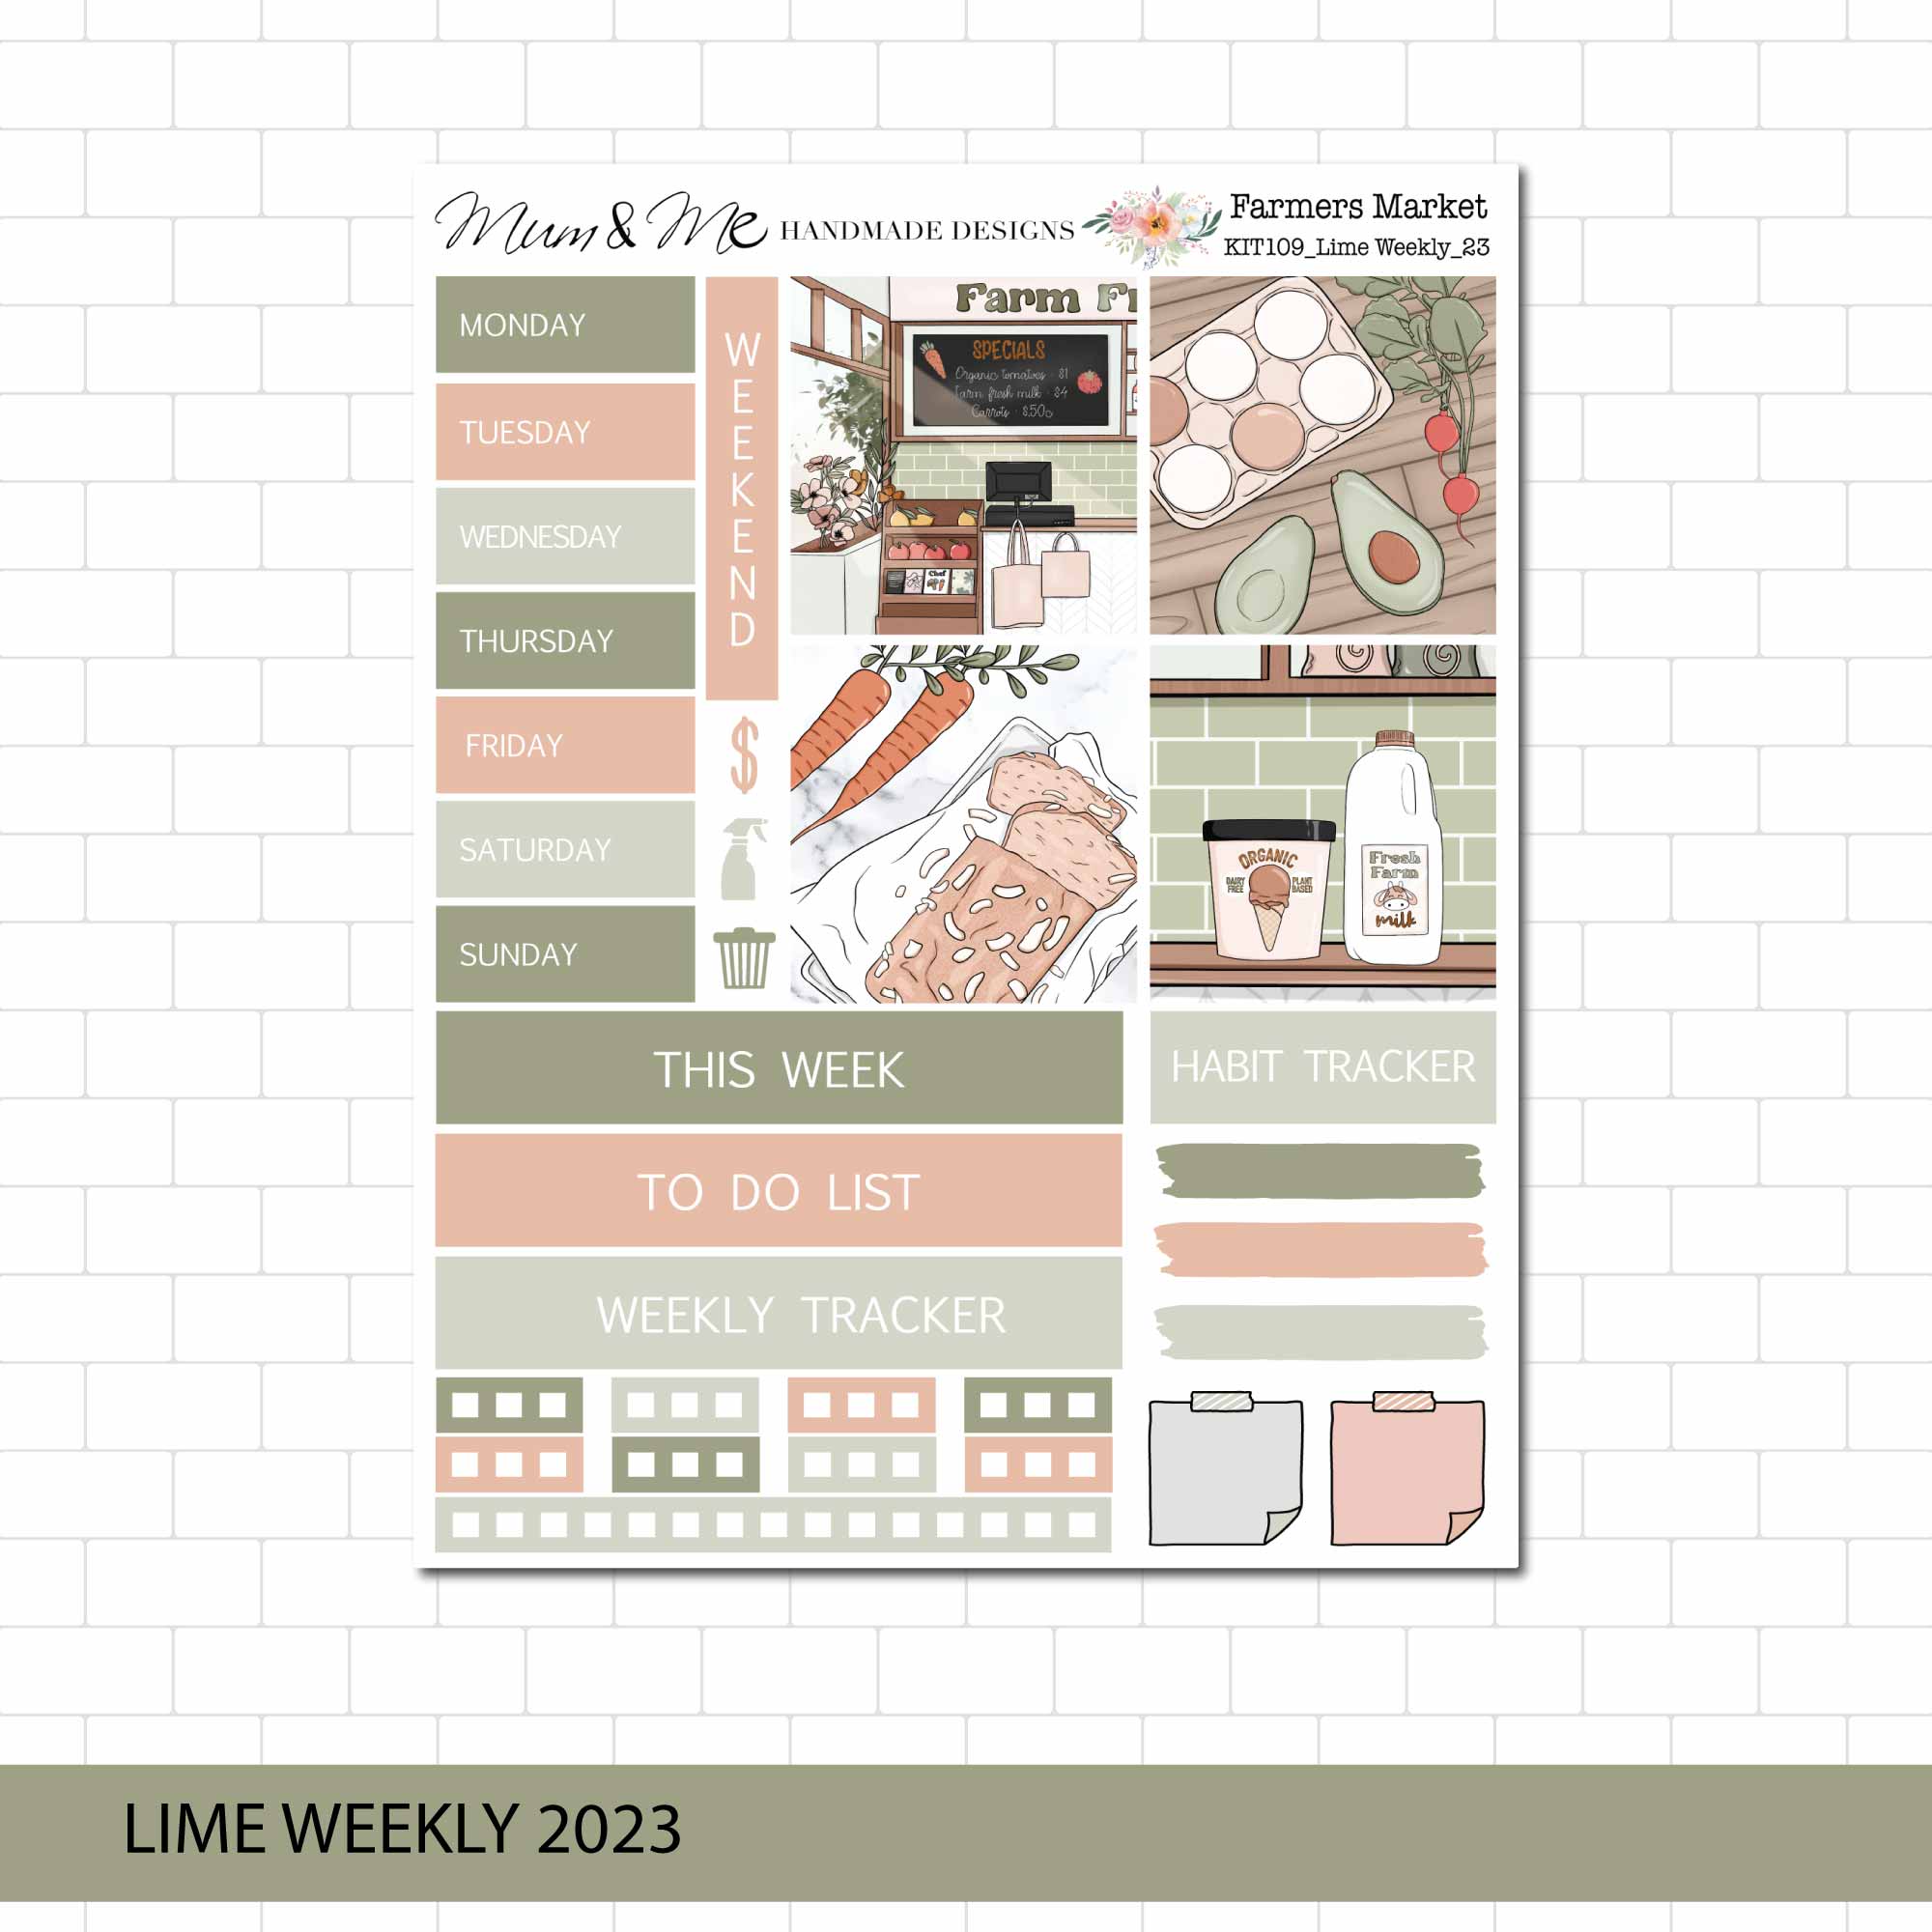 Lime Weekly: Farmers Market